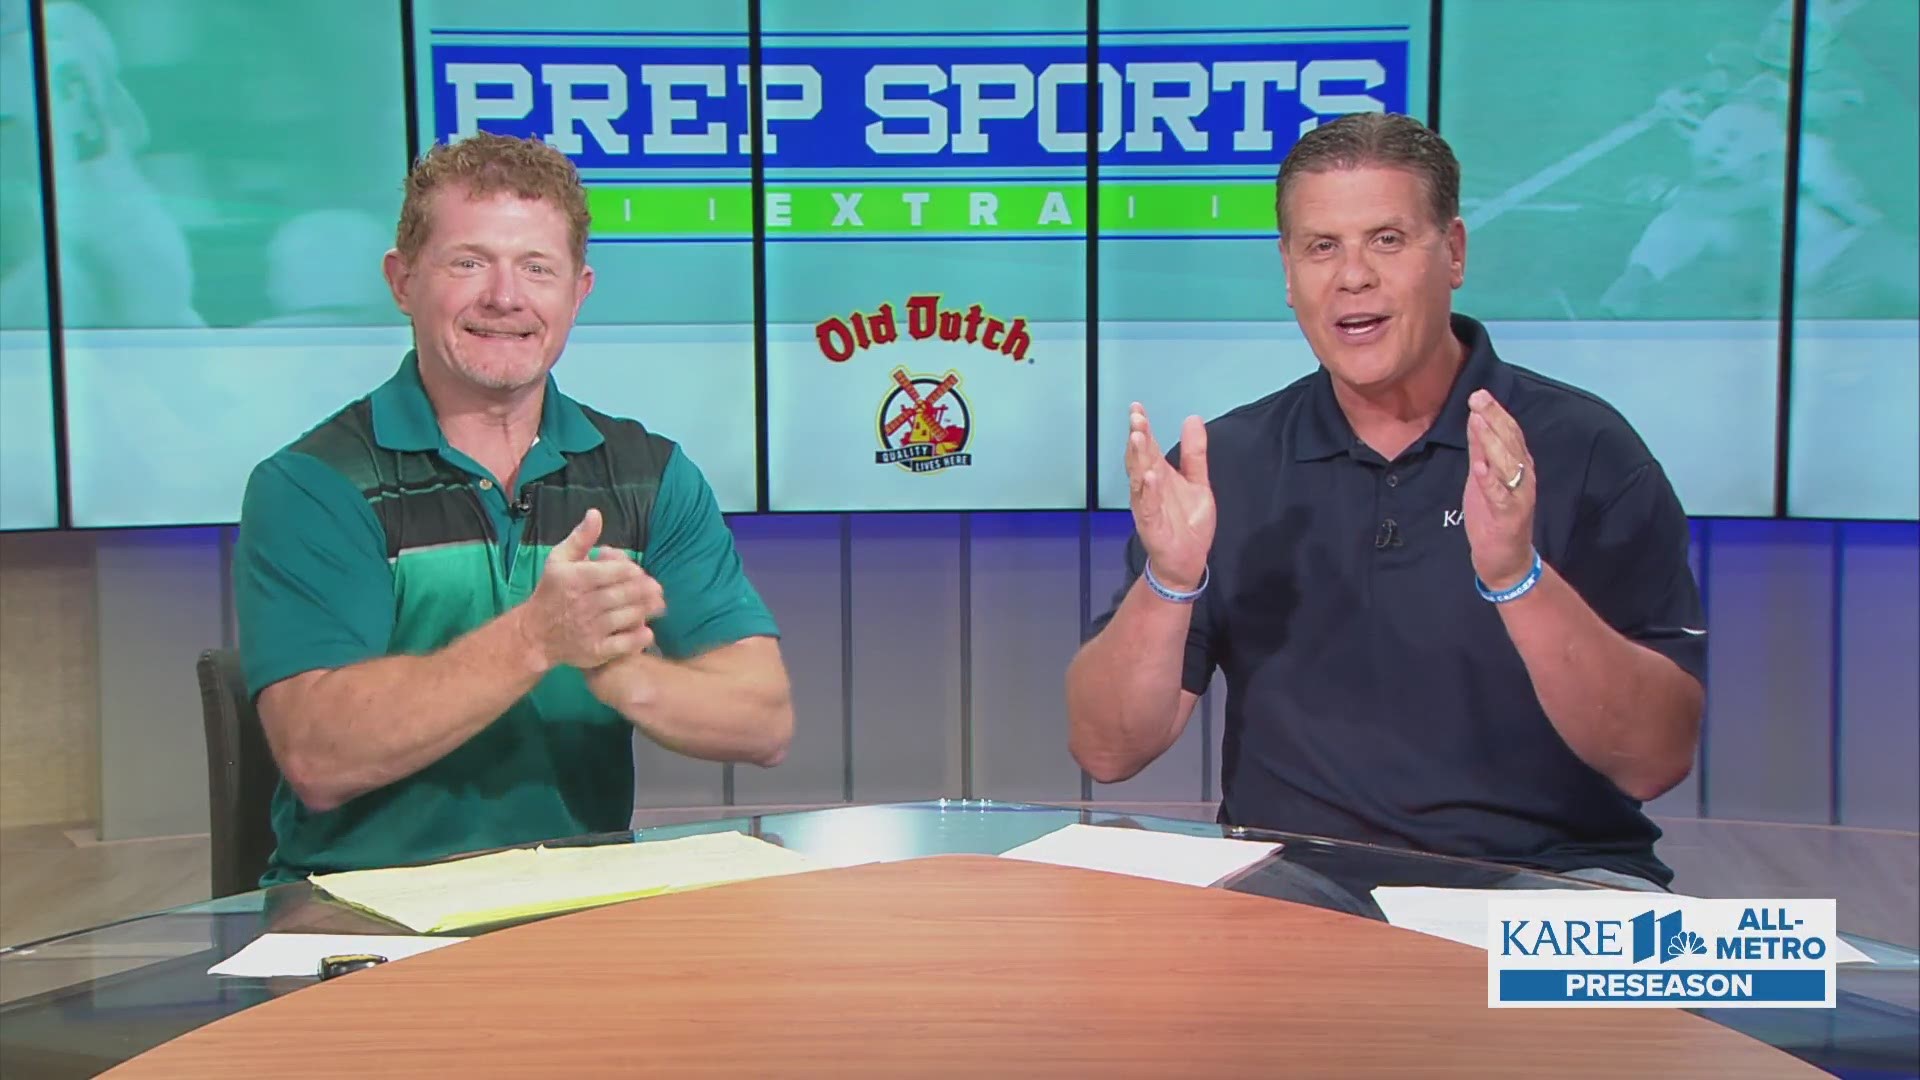 Ahead of the 36th year of the KARE 11 Prep Sports Extra, Randy Shaver and photojournalist Craig Norkus announce the 24 players named to KARE 11's Preseason All-Metro Football Team.